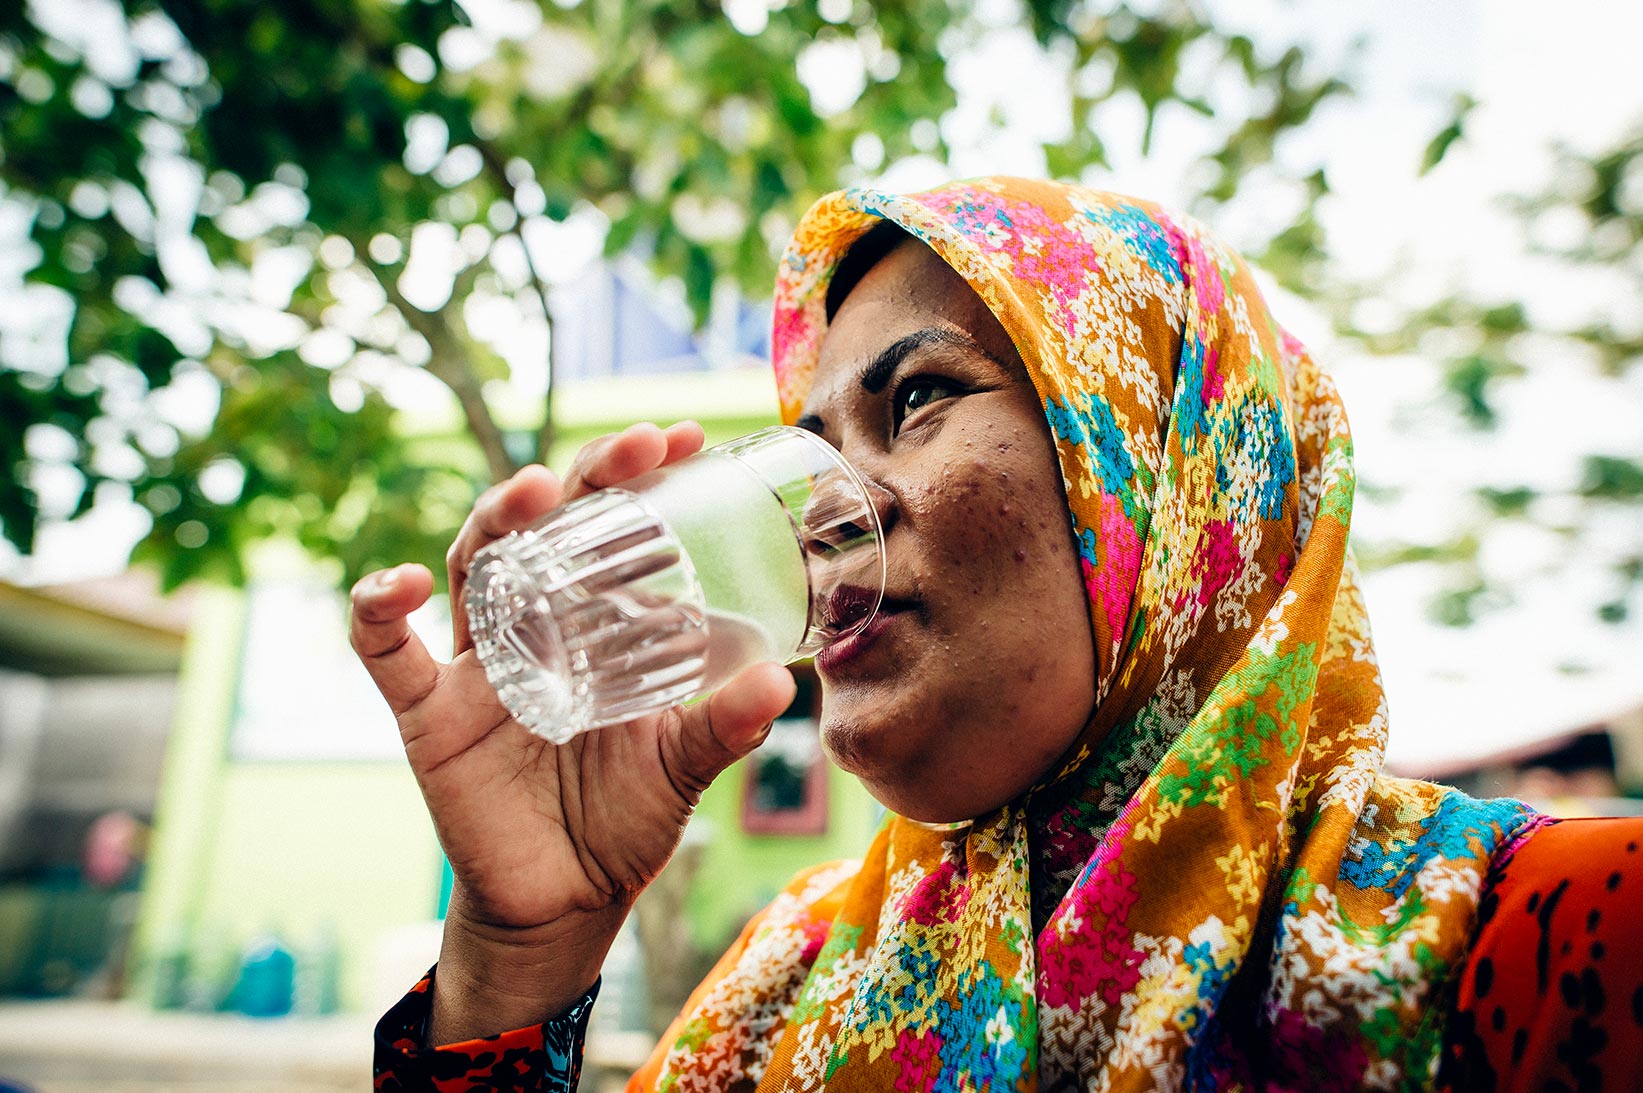 Hayani drinks safe water at her home in Indonesia.